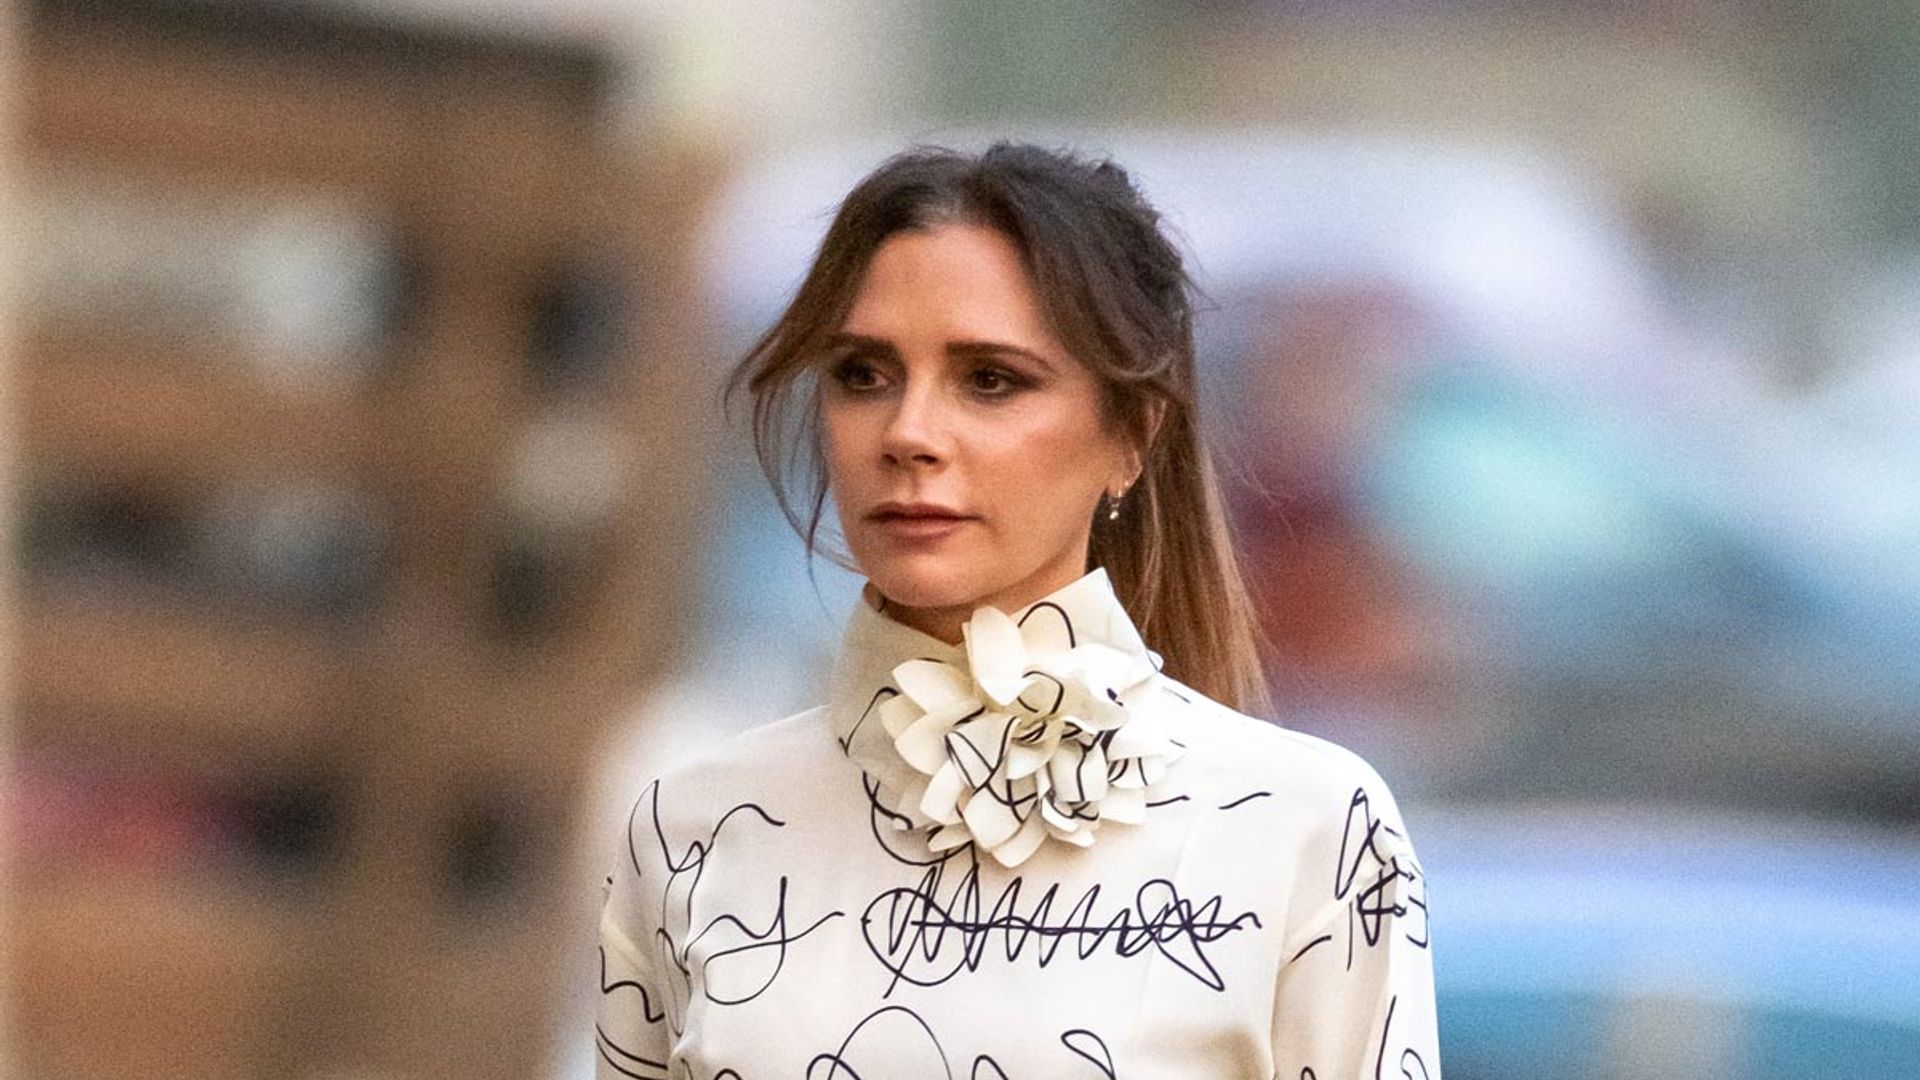 Victoria Beckham finally gets her hands on something very exciting